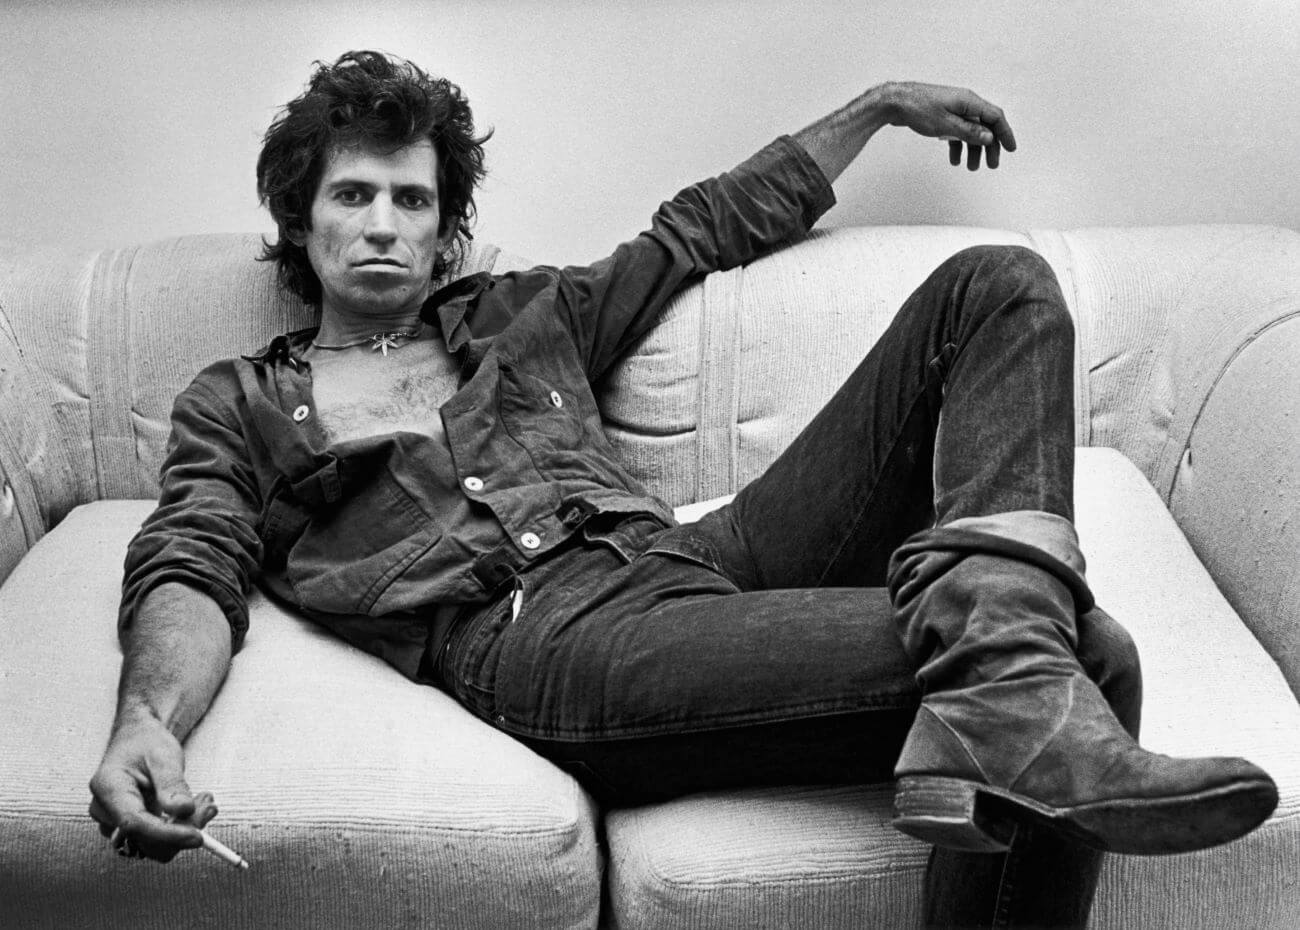 A back and white picture of Keith Richards sprawled on a couch with a cigarette in his hand.